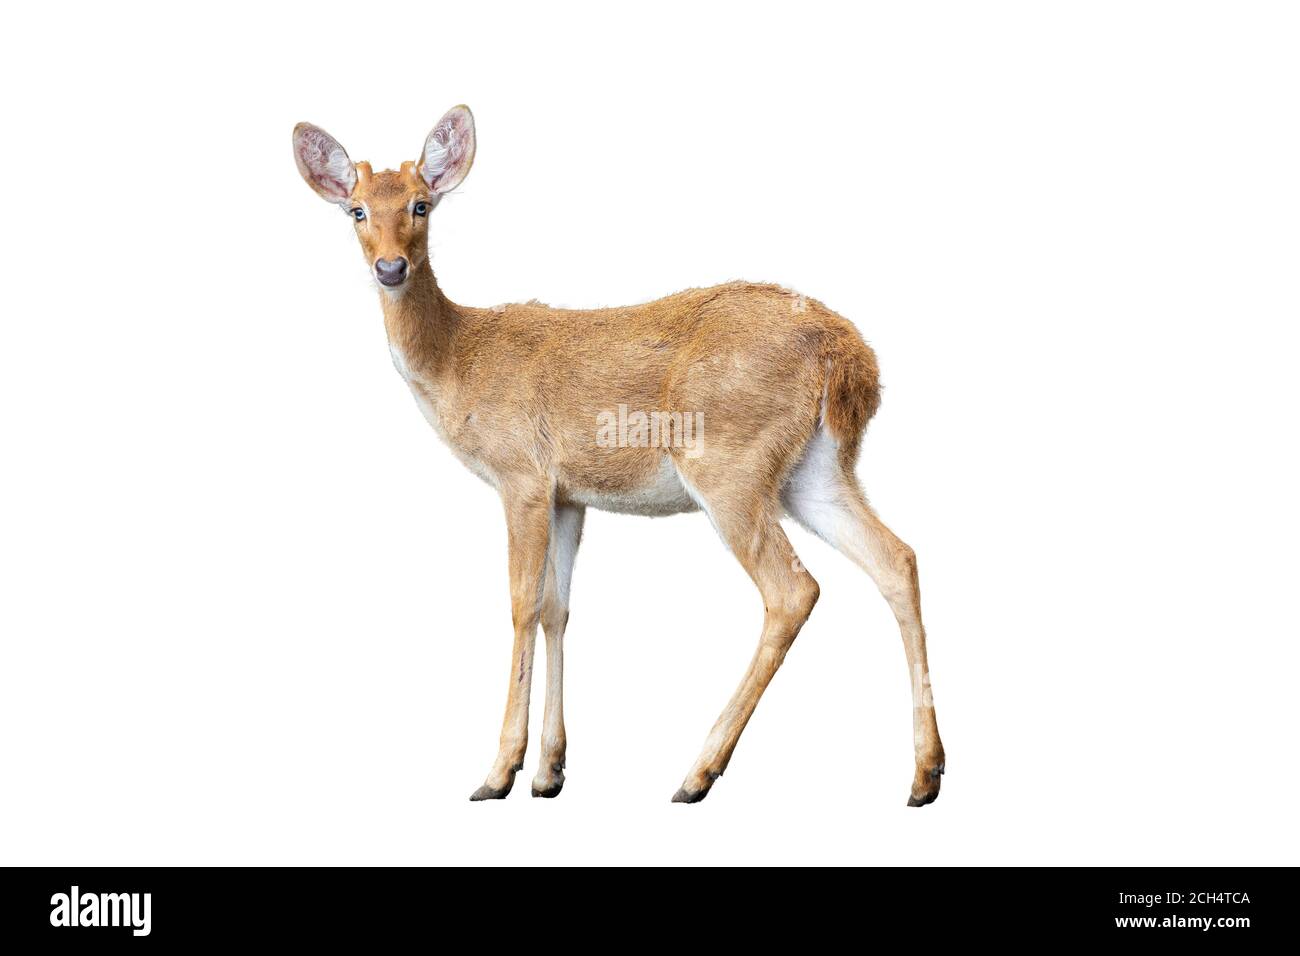 Brown deer standing isolate white background. Stock Photo